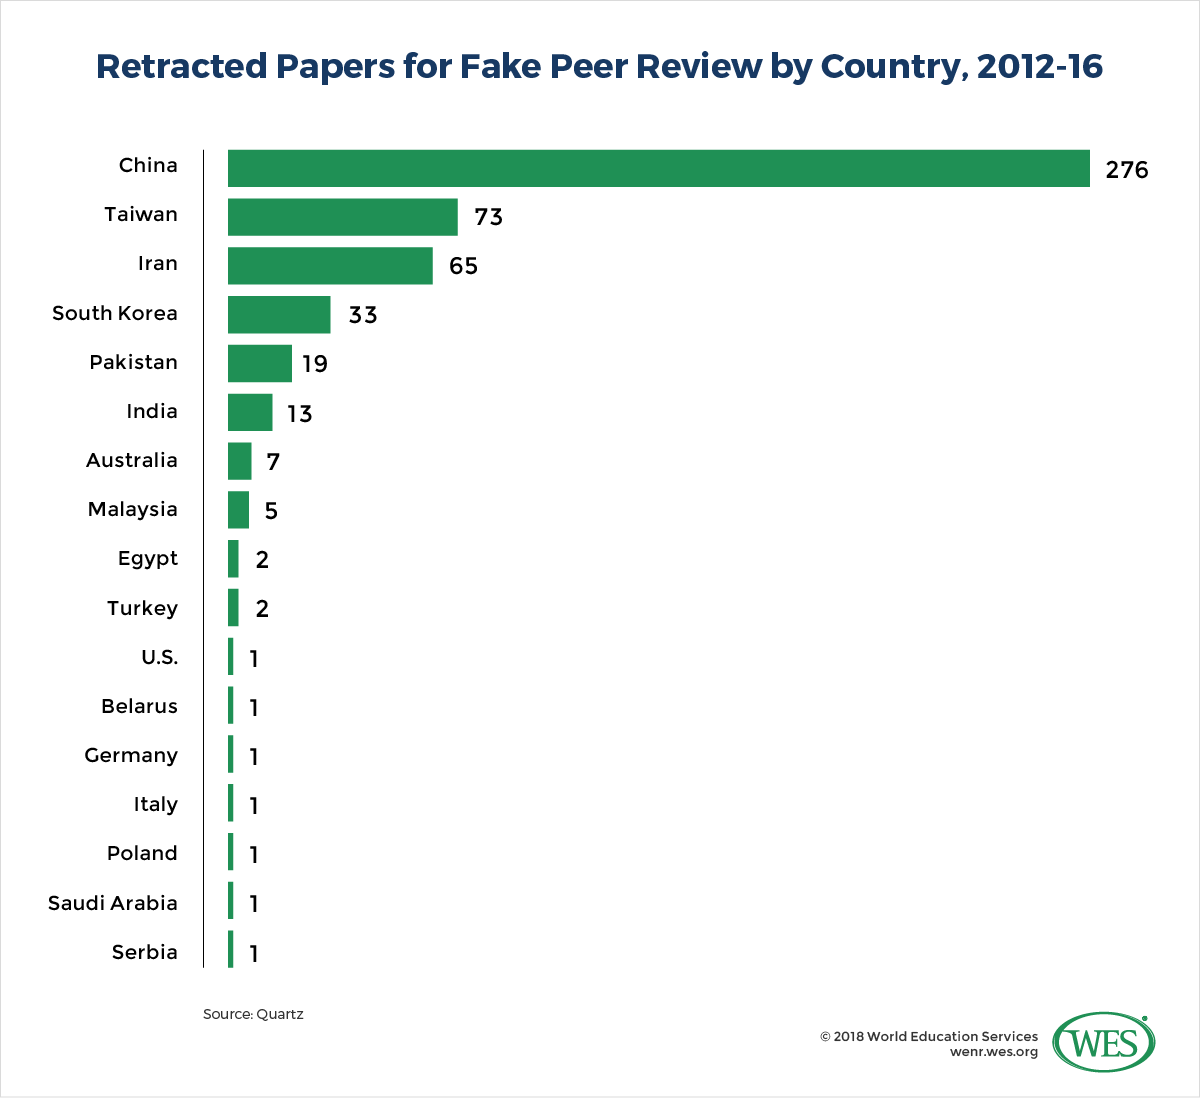 A chart showing the number of retracted papers for fake peer review by country between 2012 and 2016. With 276, China leads by far, retracting more than three times the next highest country, Taiwan. 